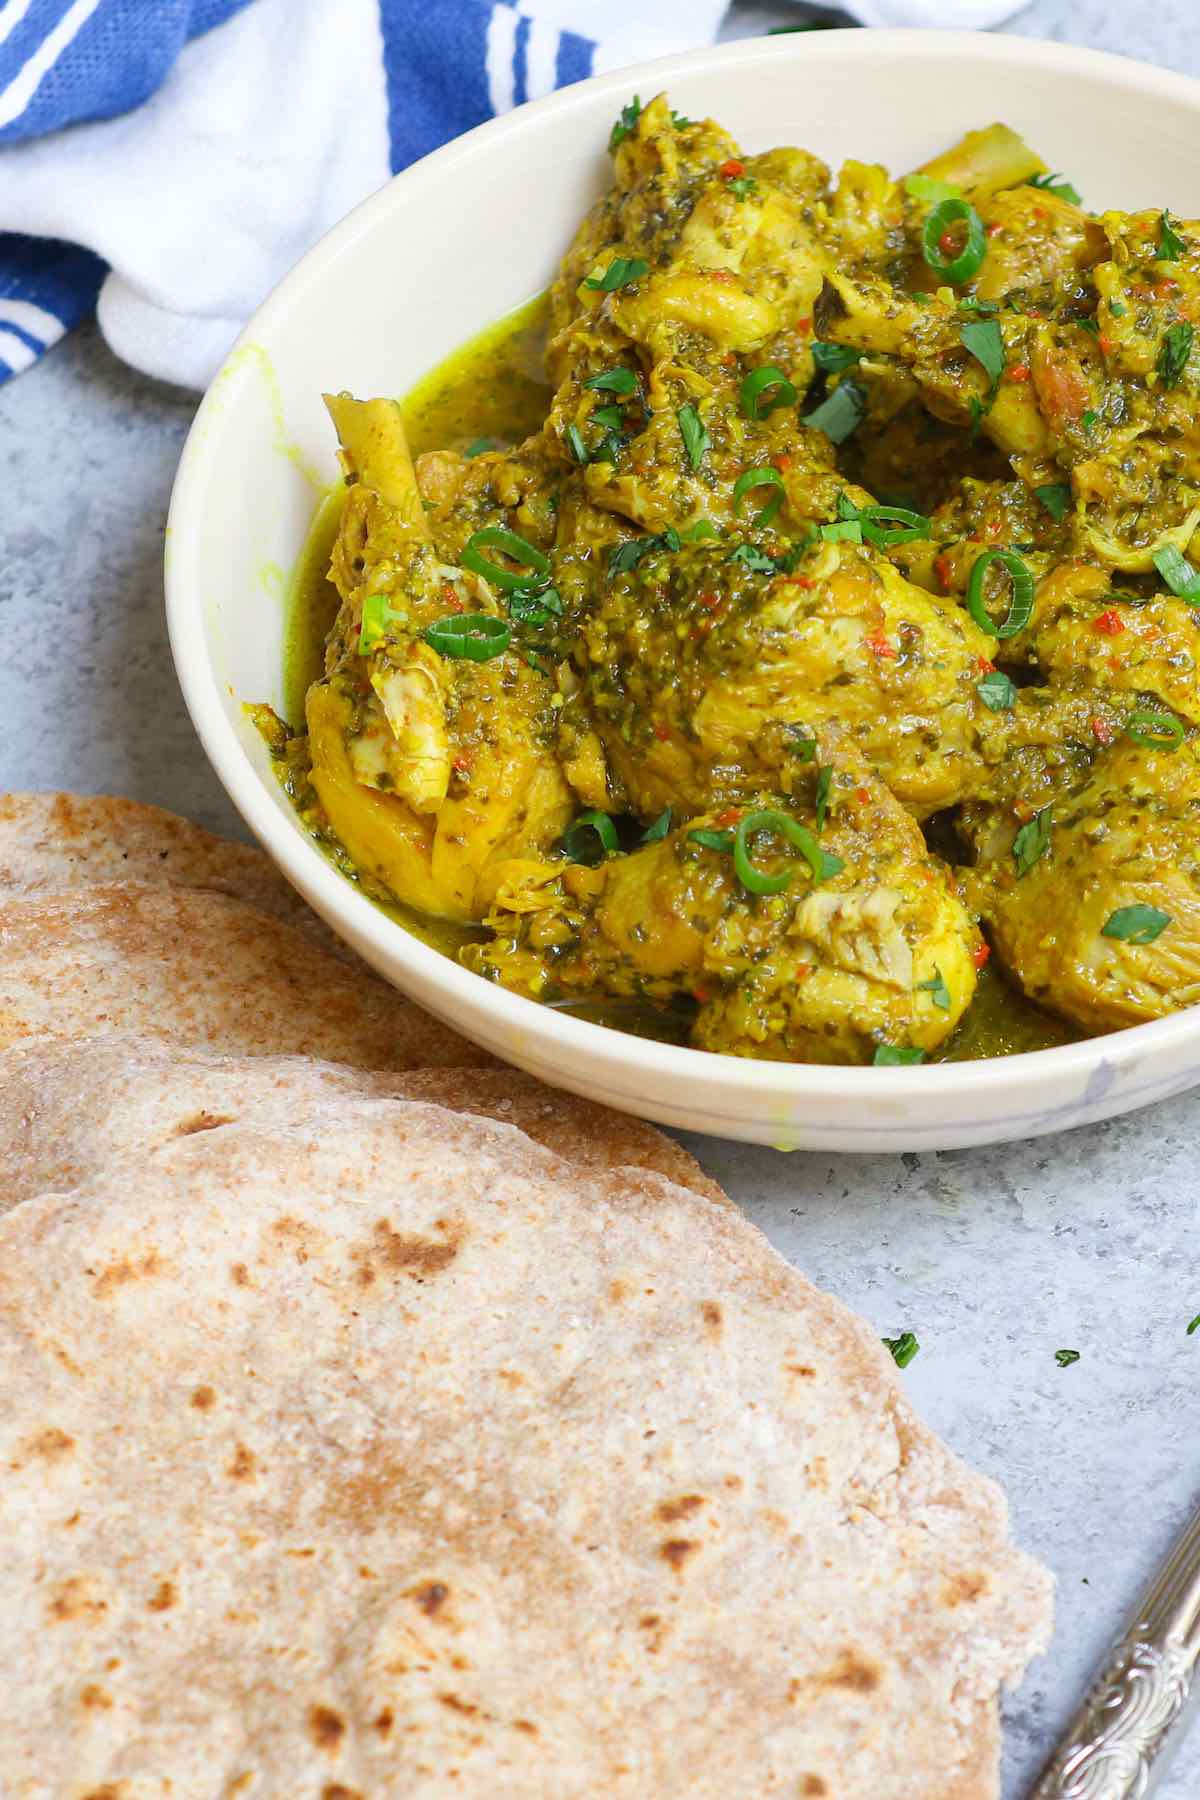 A serving of Trinidad Curry Chicken with roti